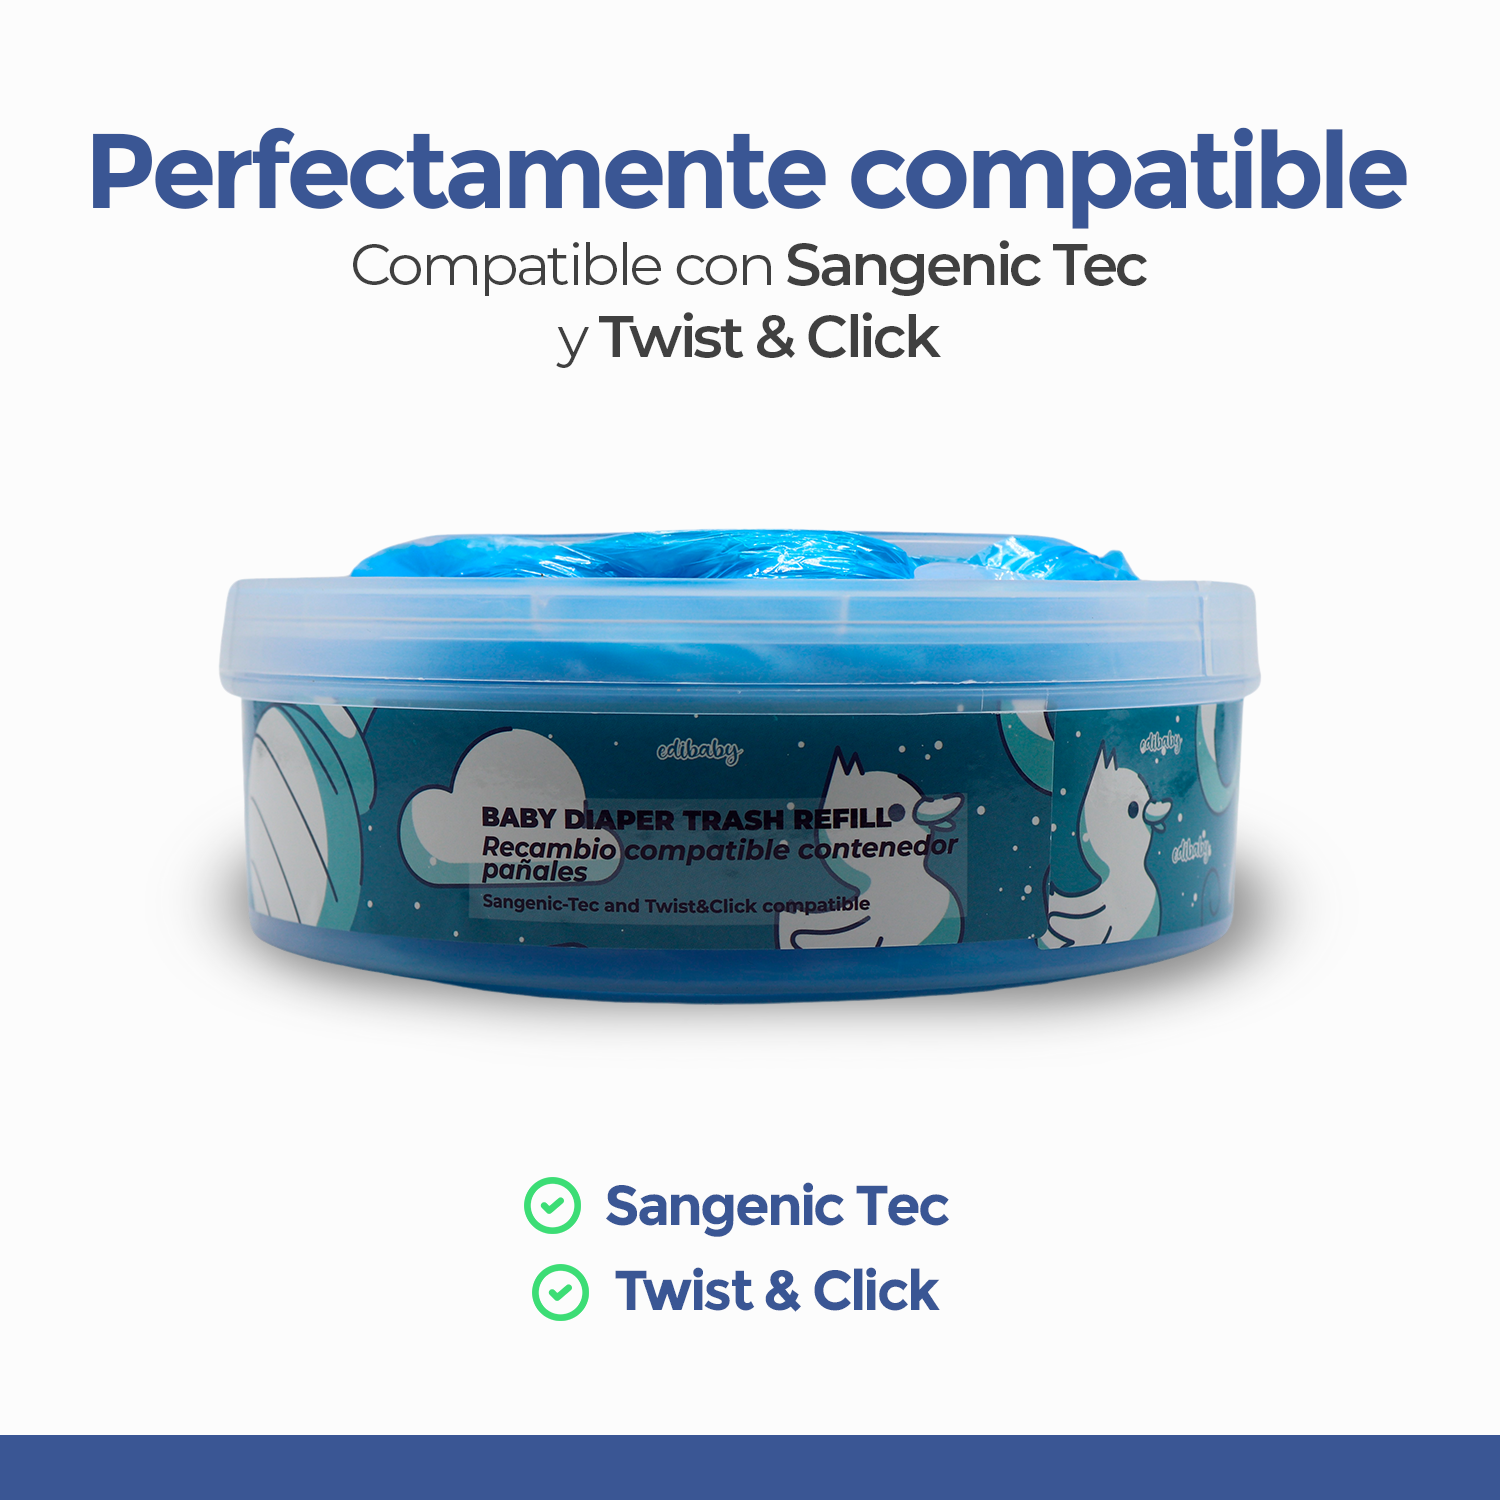 Compatible Tommee Tippee Spare parts, 8 PCs Pack, Sangenic Tec